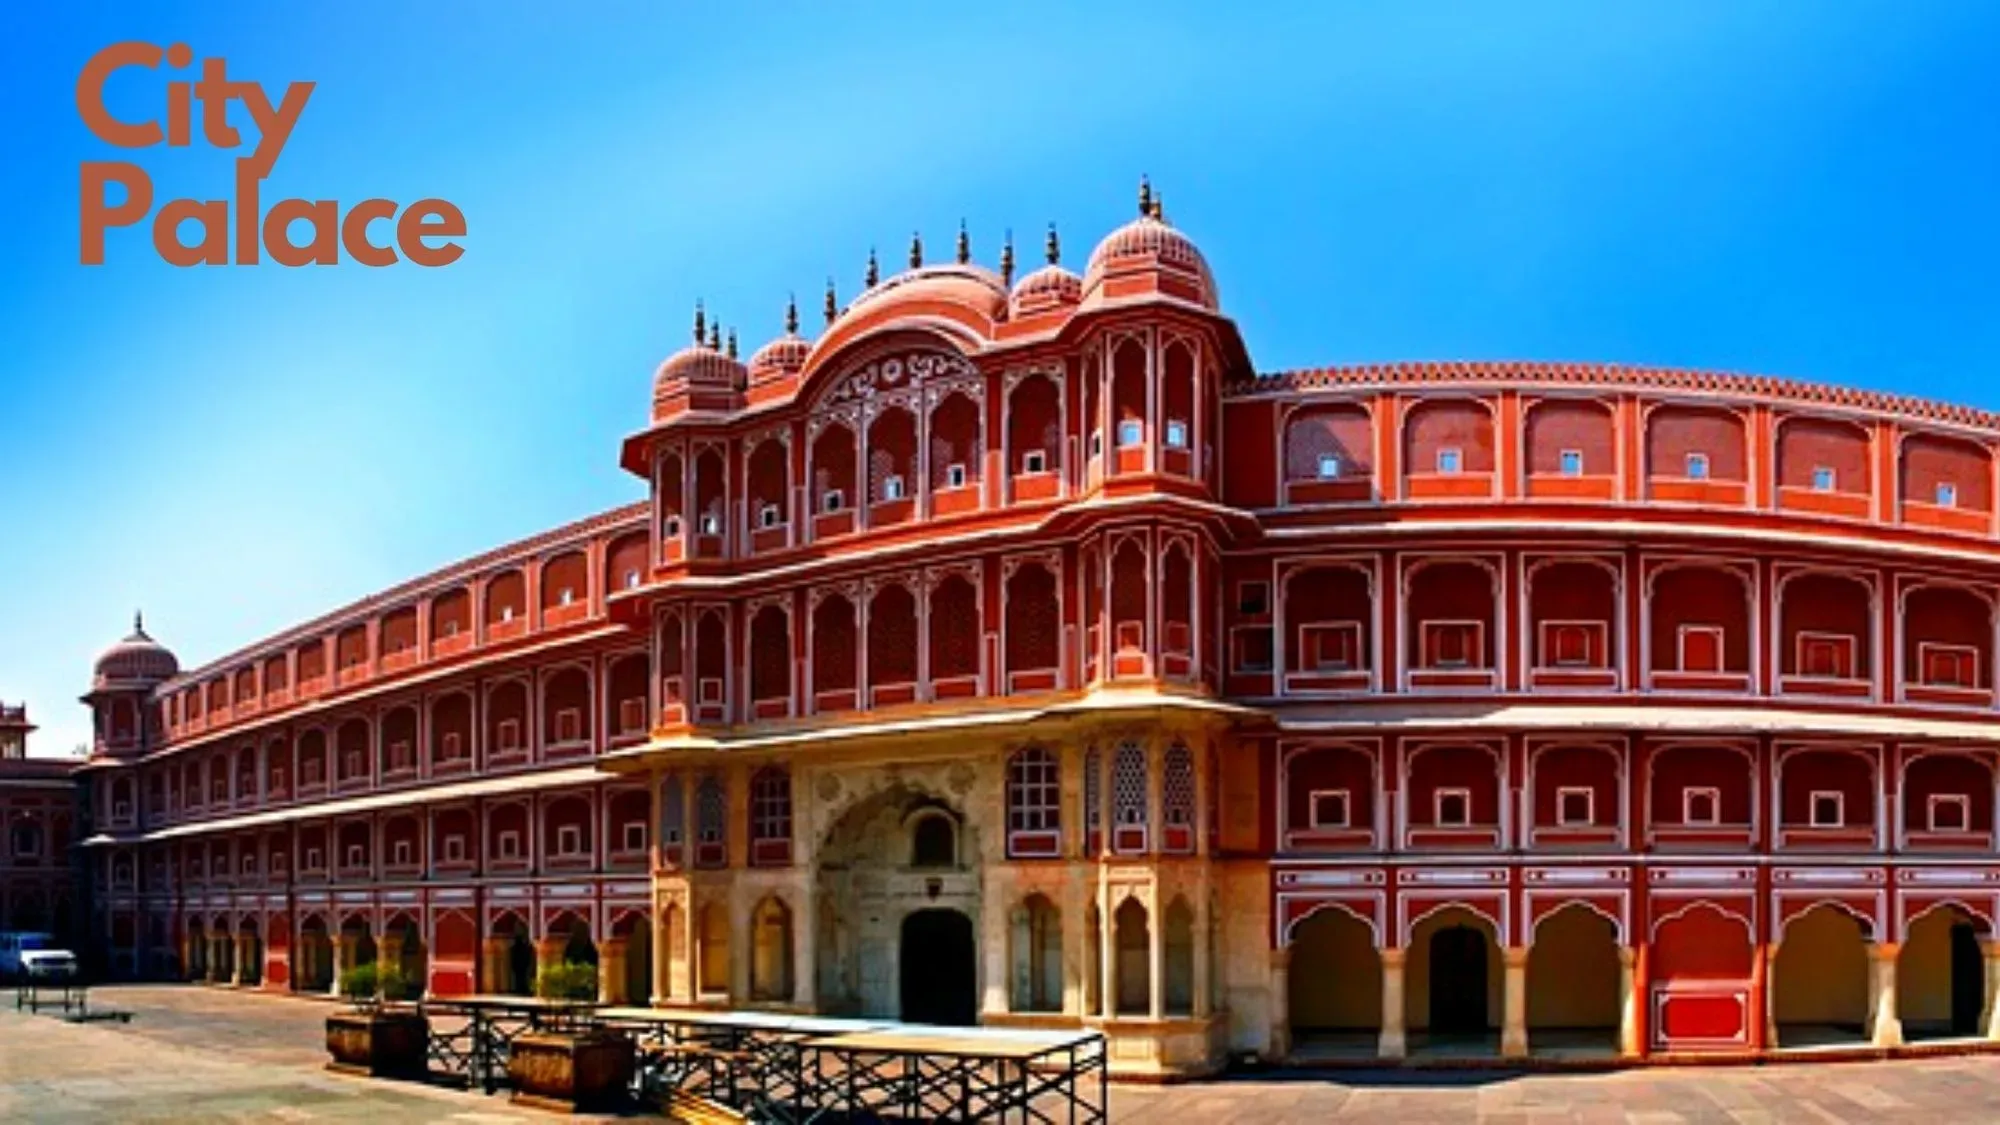 City Palace, Jaipur: History, Architecture, Fee, and Timings